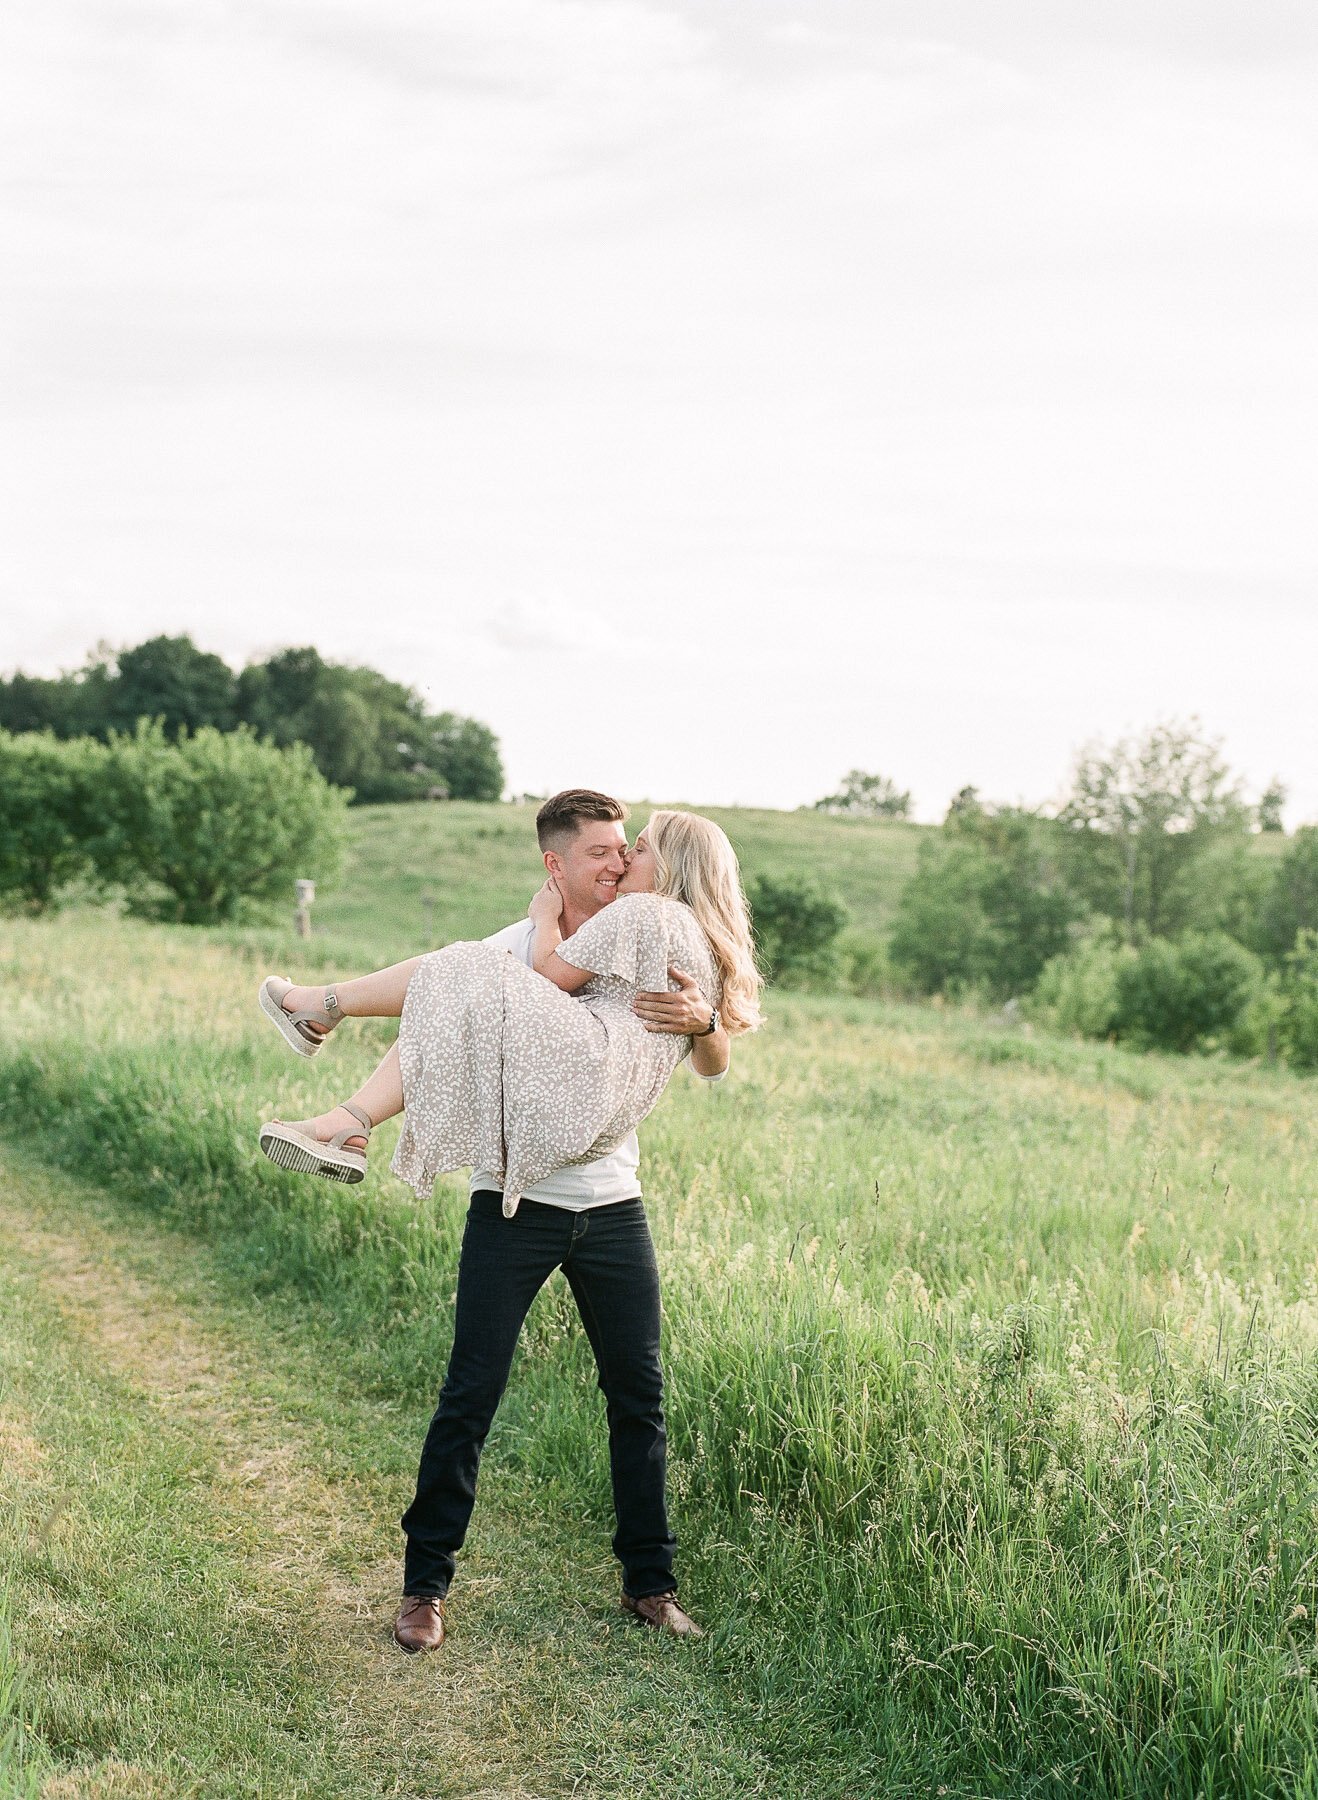 Engagement photographer in upstate NY 